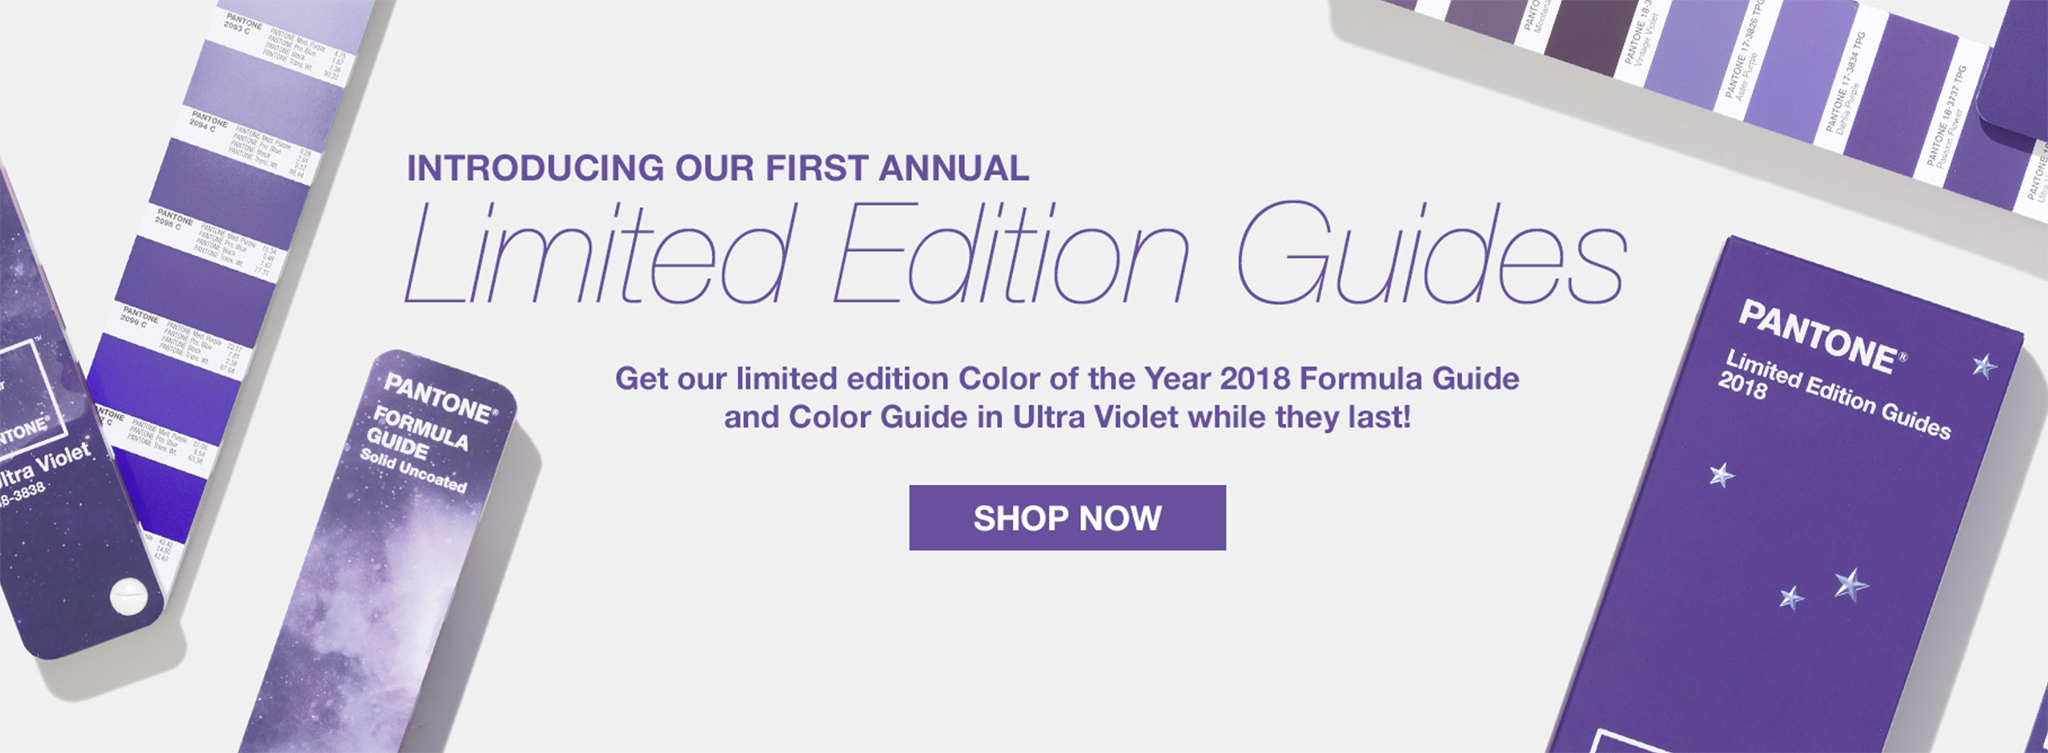 The Pantone Color Institute would like to sell consumers a limited edition guide which is the same as their existing guides except it is graced with the 2018 Color of the Year: 'Ultra Violet'. Whomever thought this up must also not know it's 'inaugural' rather than 'first annual'. | Image courtesy of Pantone under the Fair Use Doctrine.